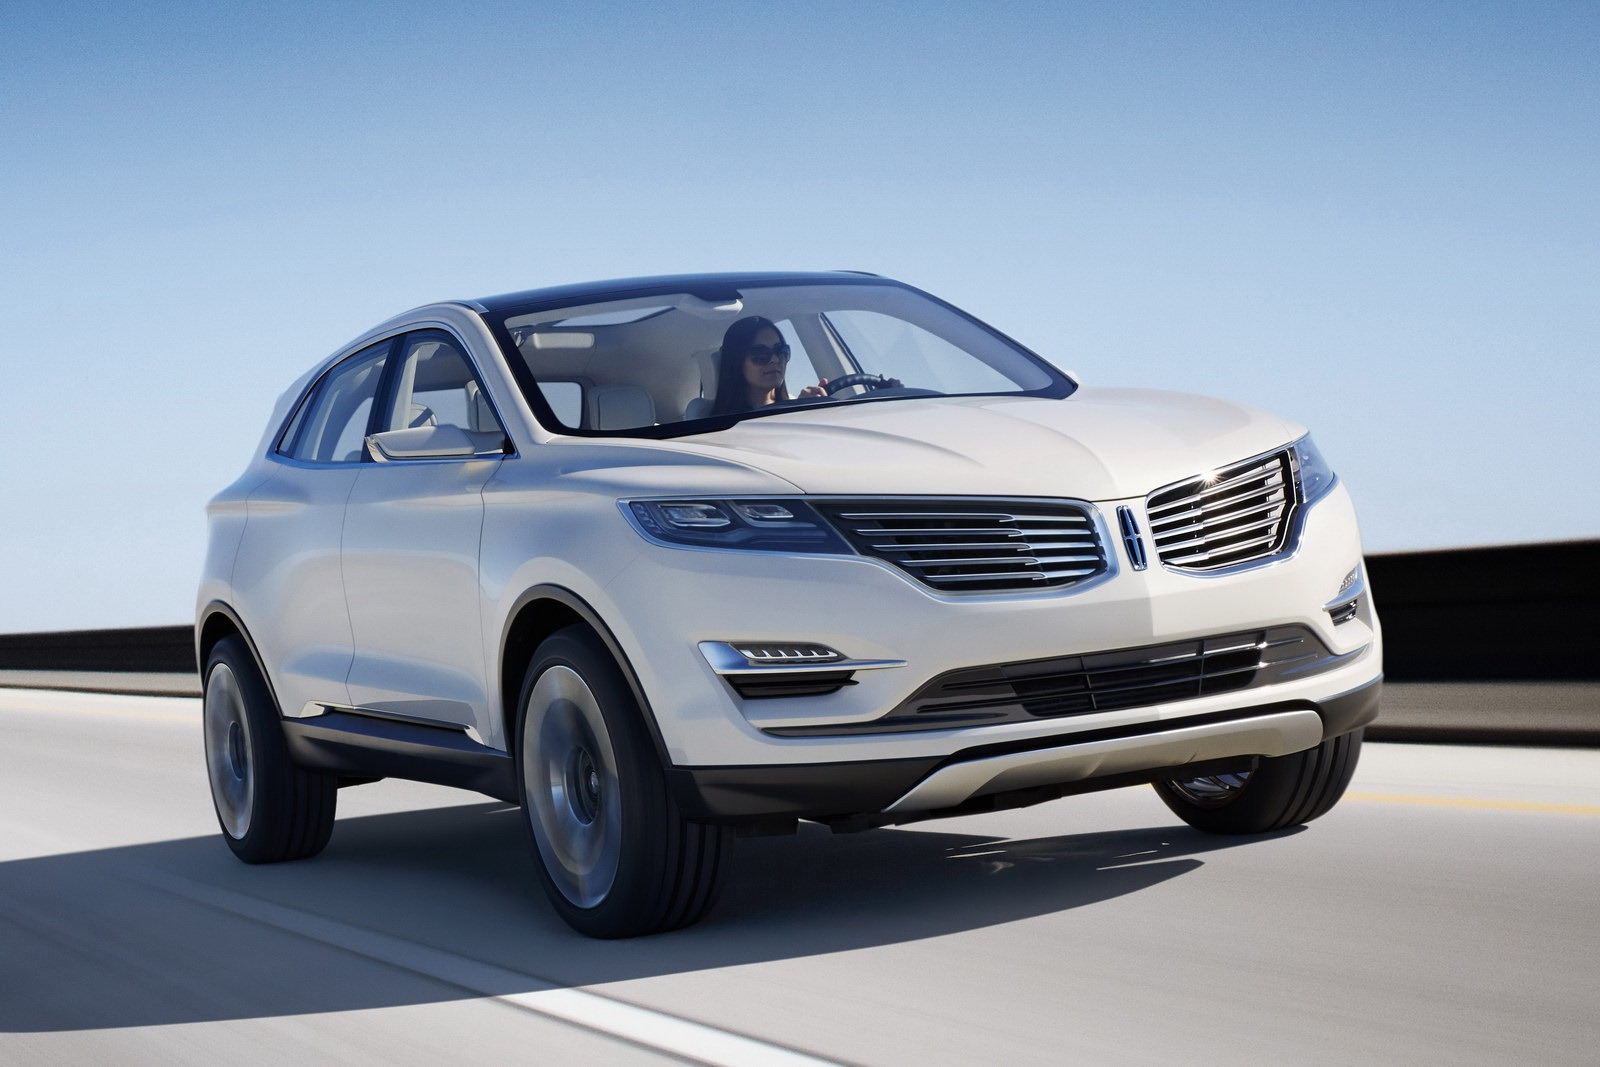 Nice wallpapers Lincoln Mkc Concept 1600x1067px